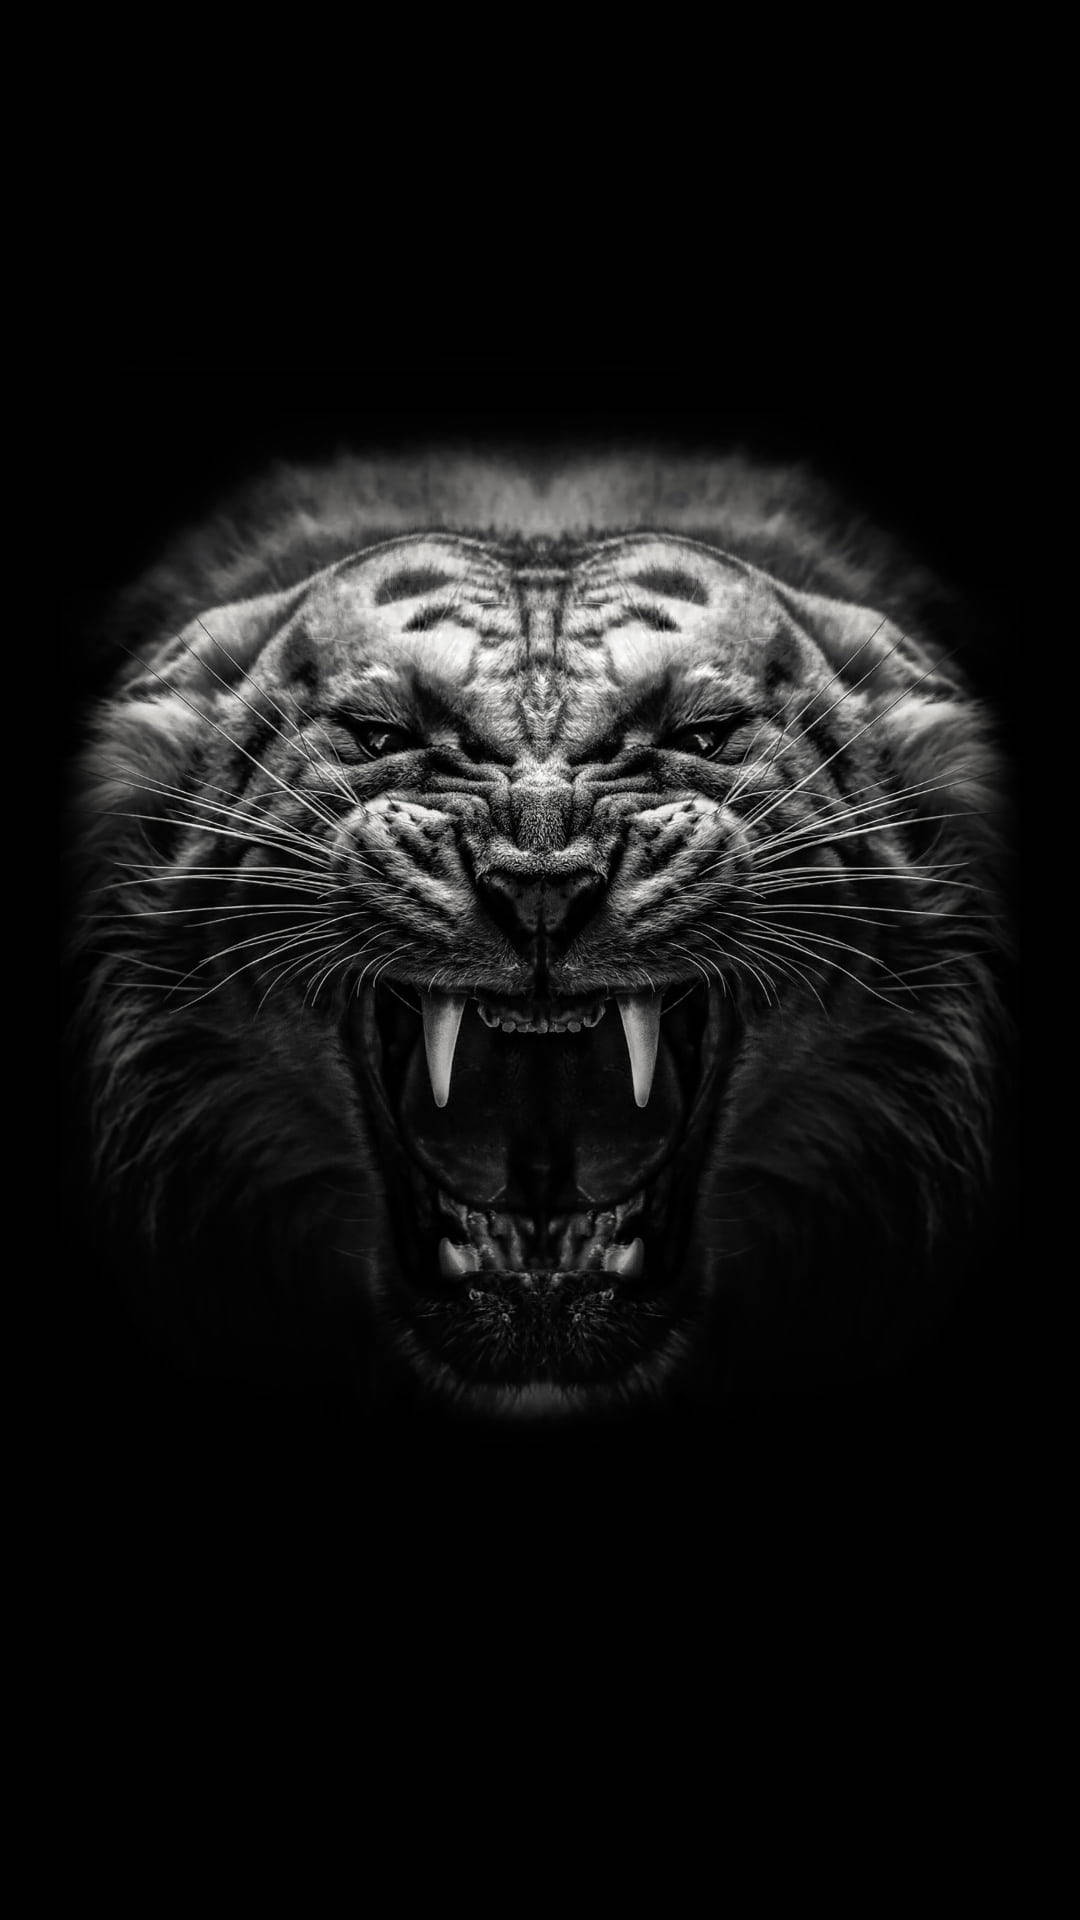 Wild And Angry Black Tiger Wallpaper